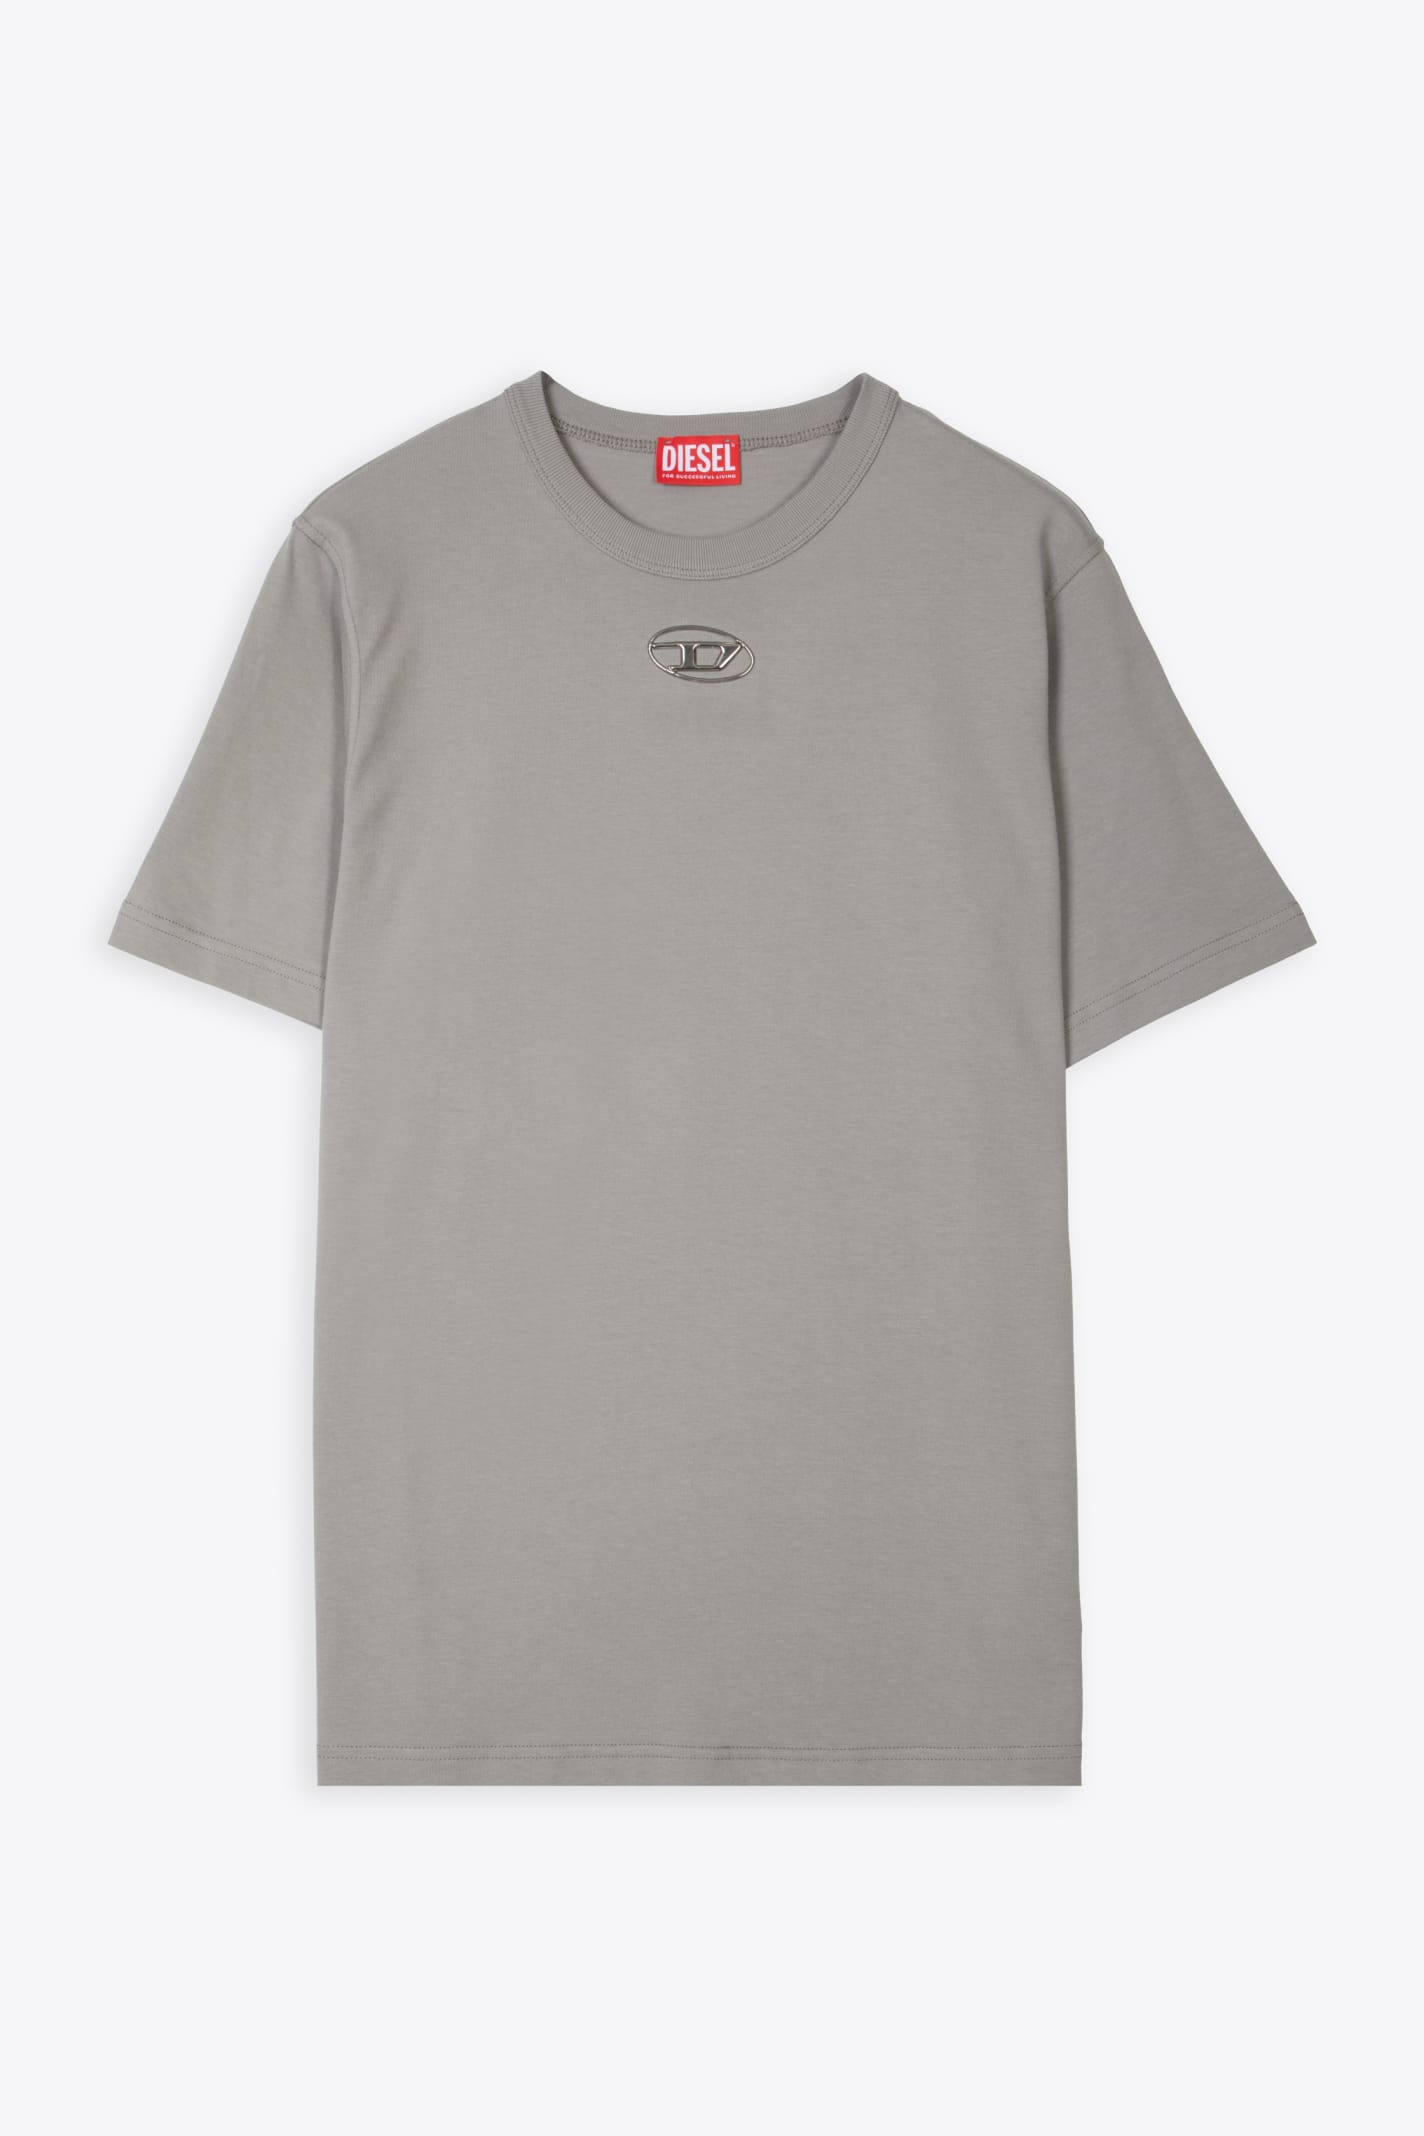 Diesel T-just-od Maglietta Grey cotton t-shirt with Oval-D rubber logo - T Just Od